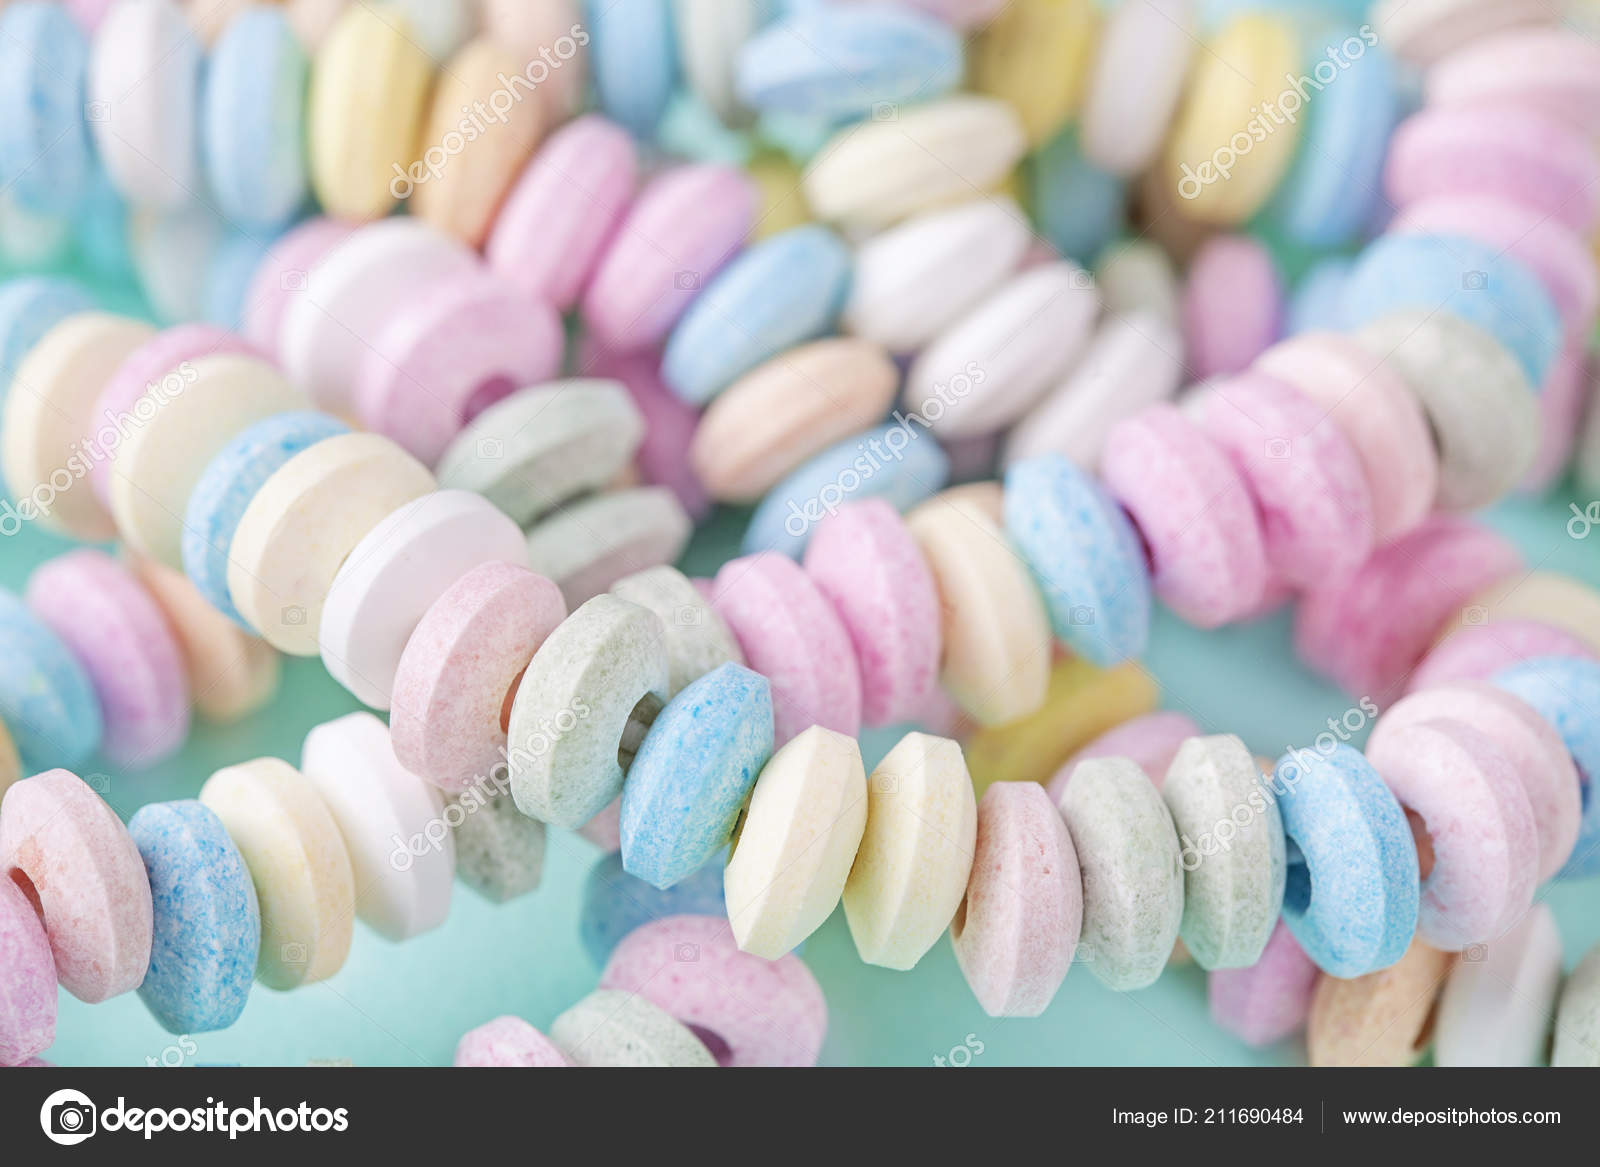 depositphotos_211690484-stock-photo-candy-necklace-blue-pastel-colored.jpg